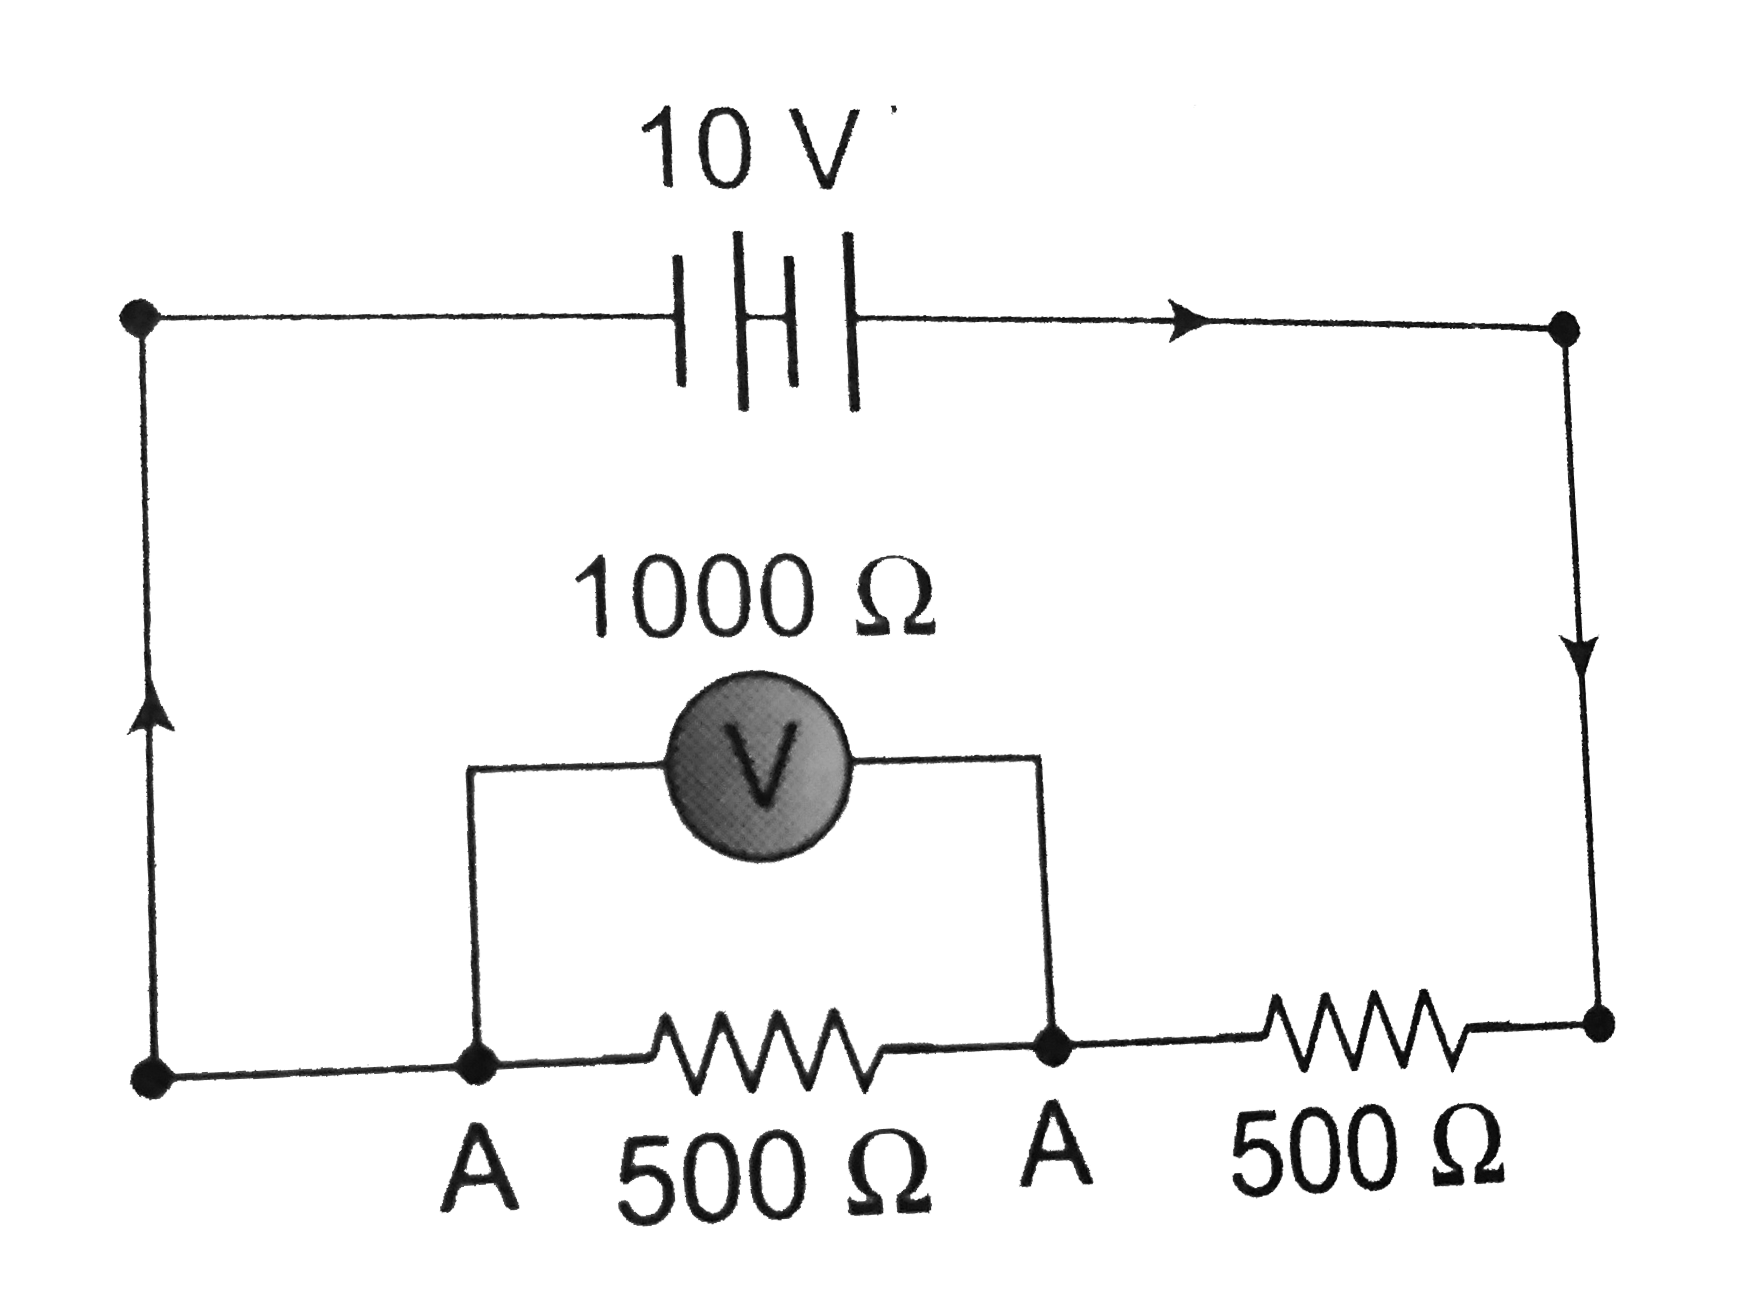 What is the reading of voltmeter in the following figure ?